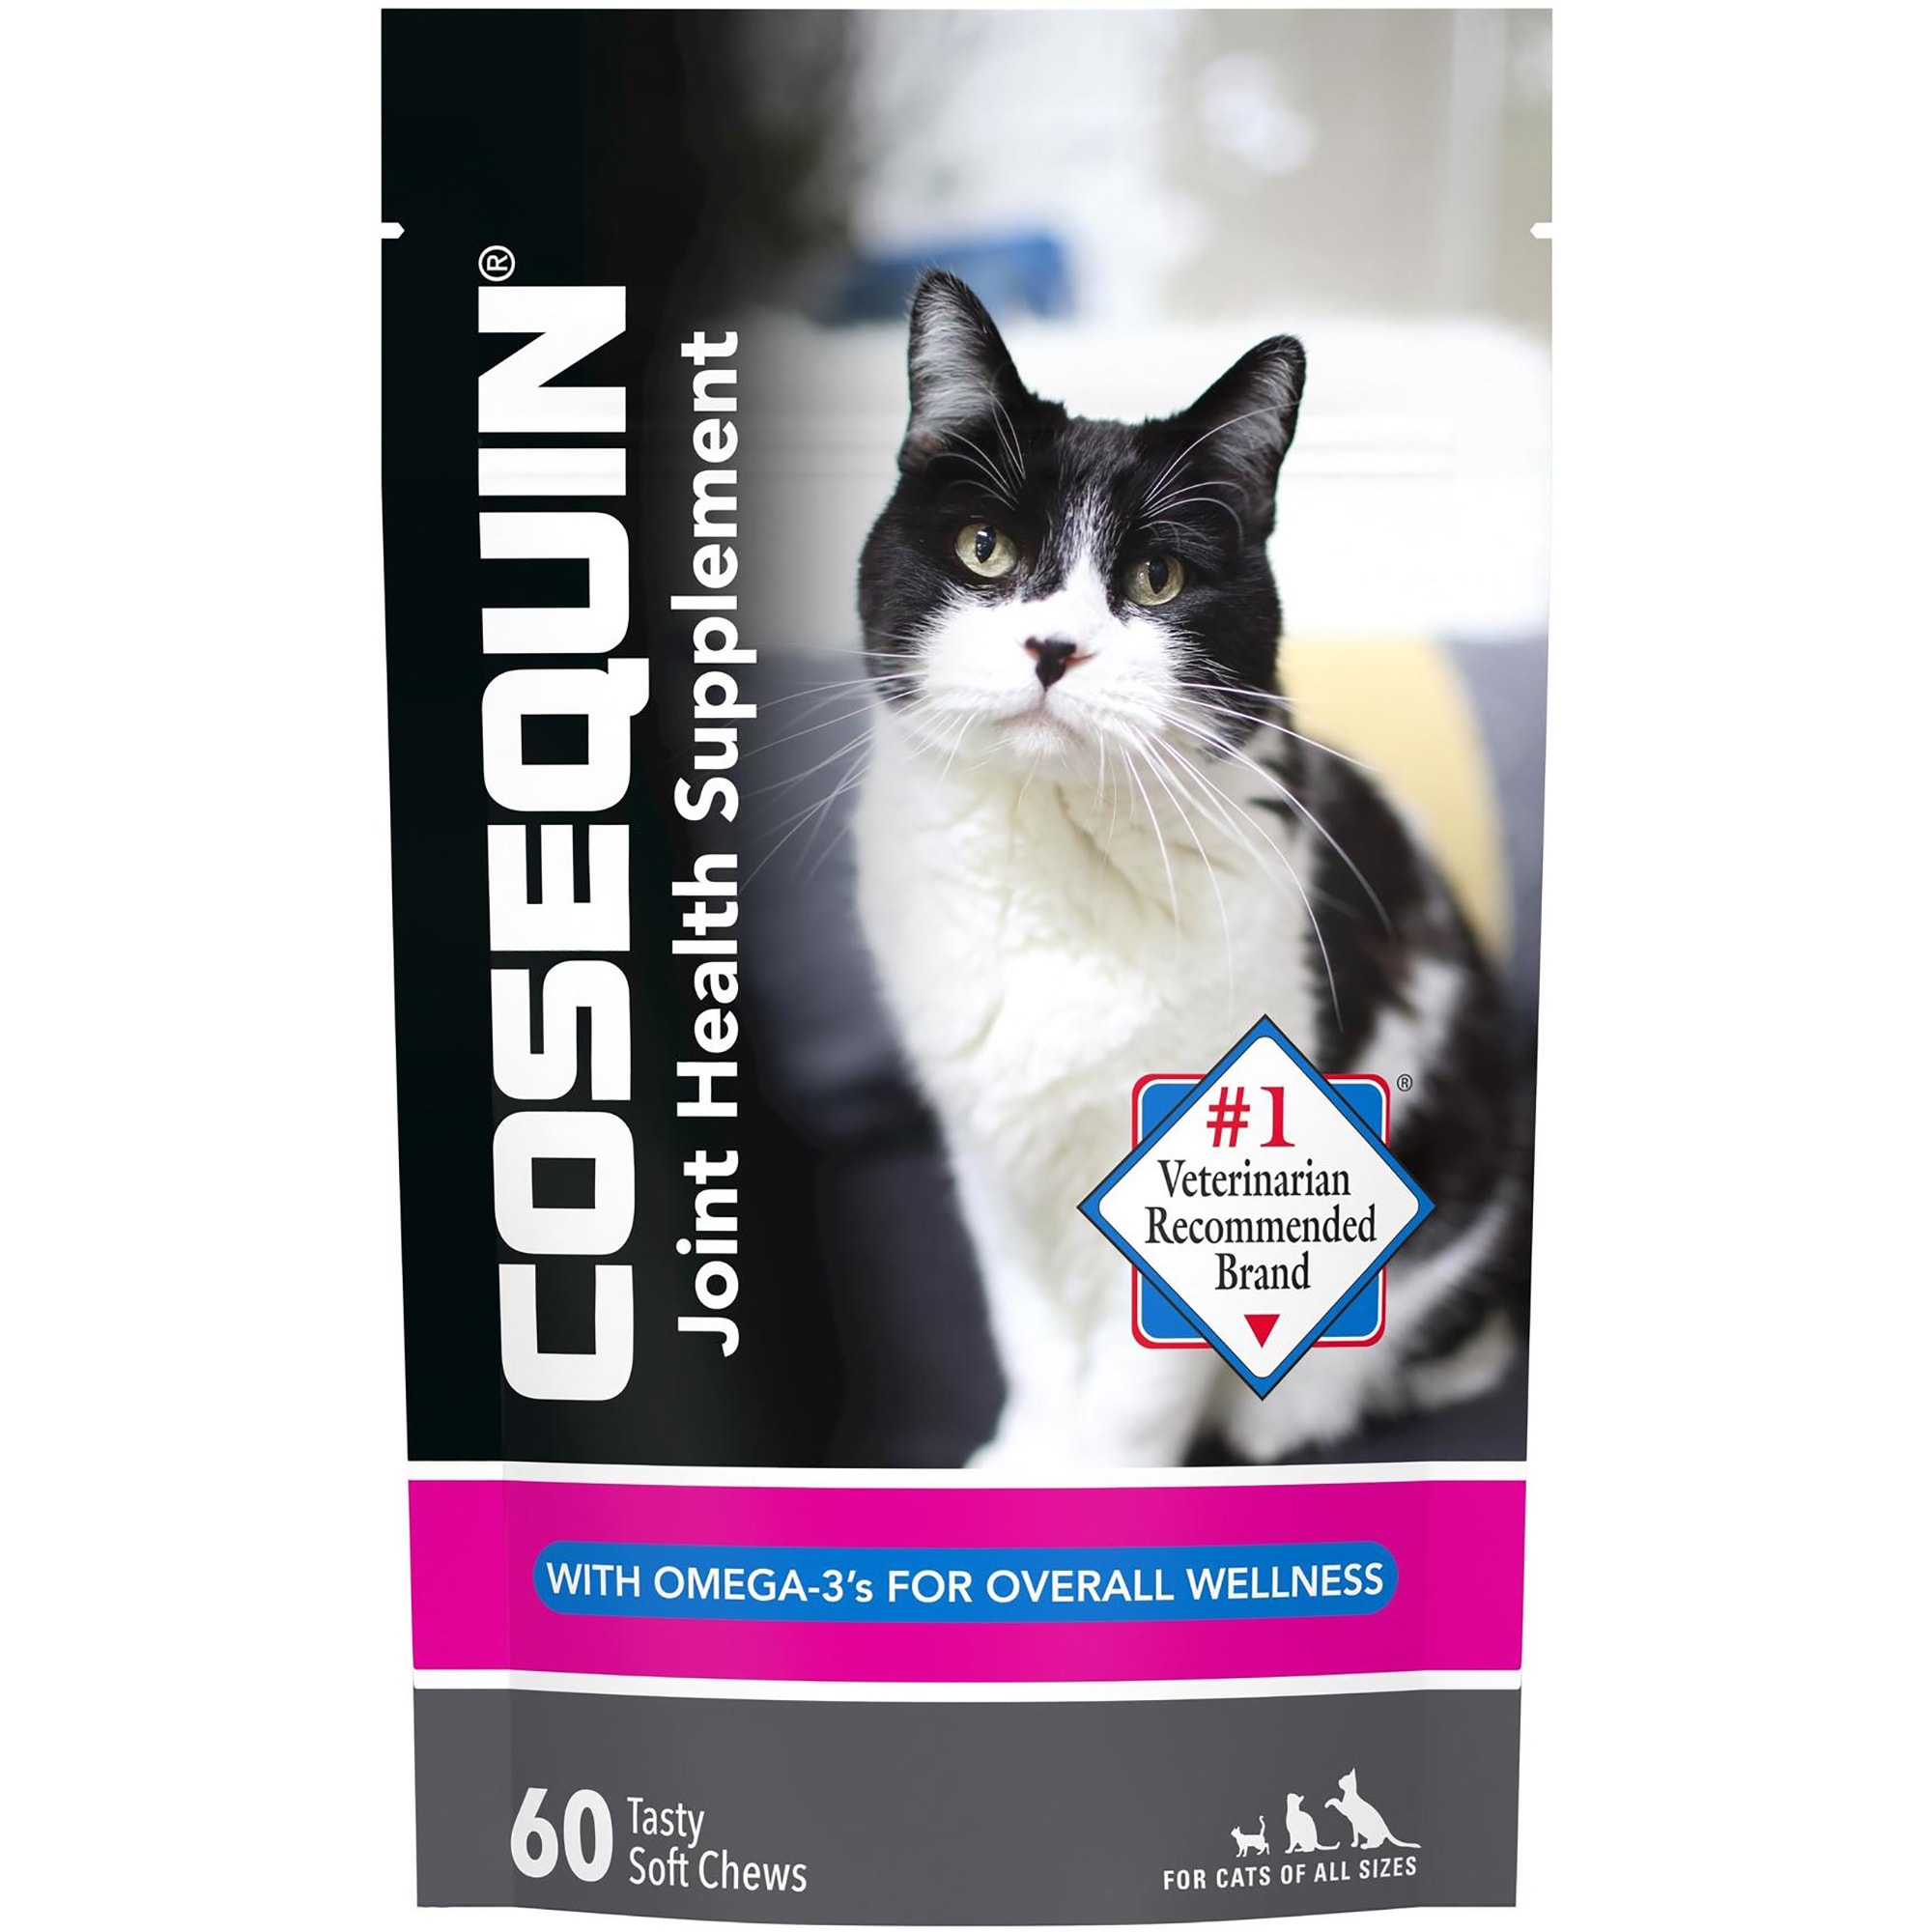 Photos - Cat Litter Box / Tray NUTRAMAX NUTRAMAX COSEQUIN Joint Health Supplement for Cats, Count of 60,